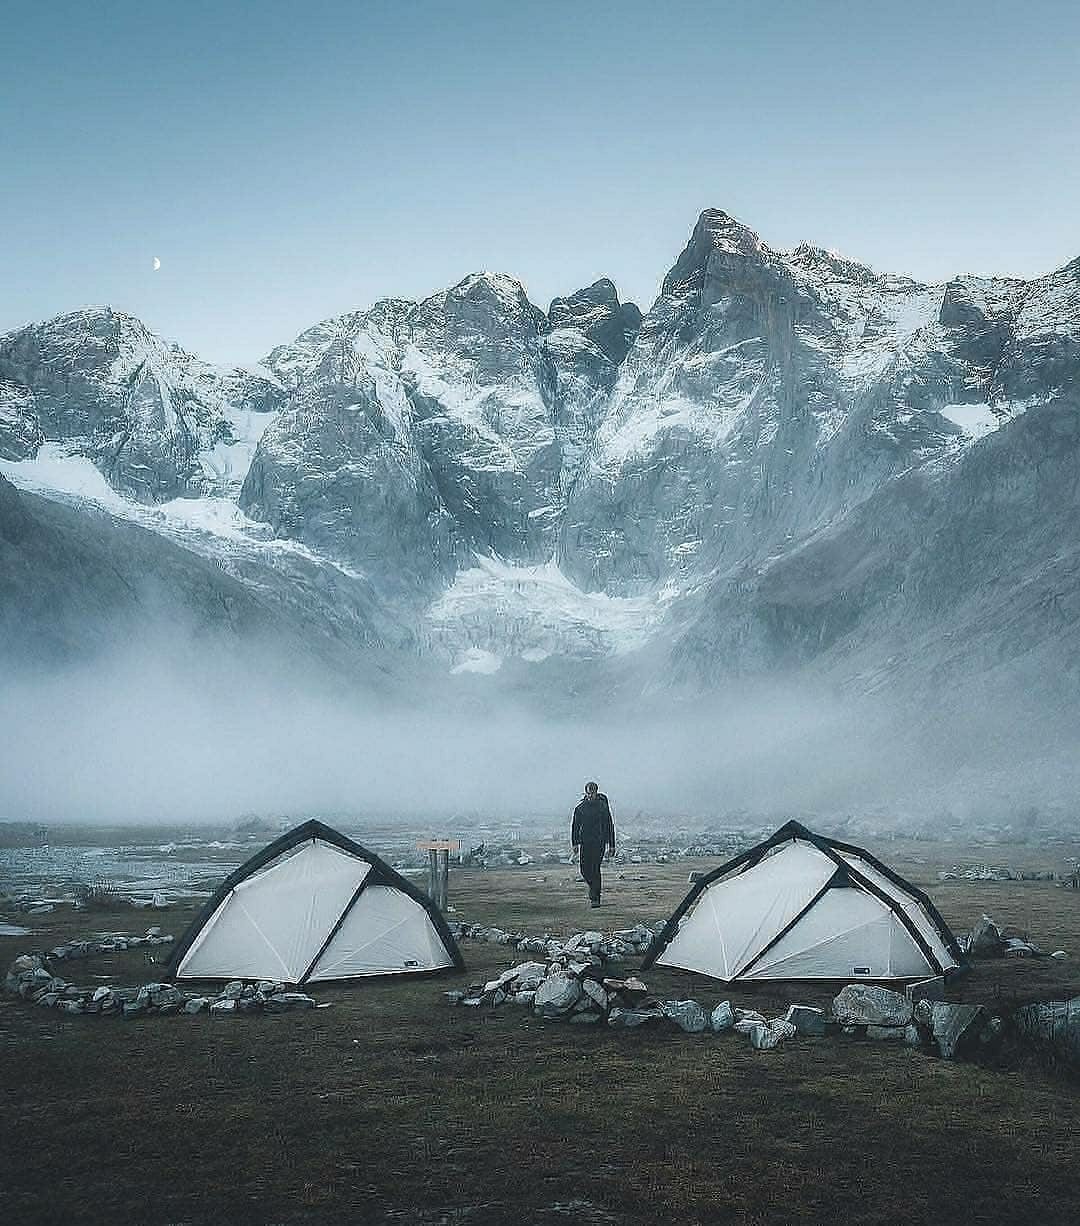 two tents in front of mountains